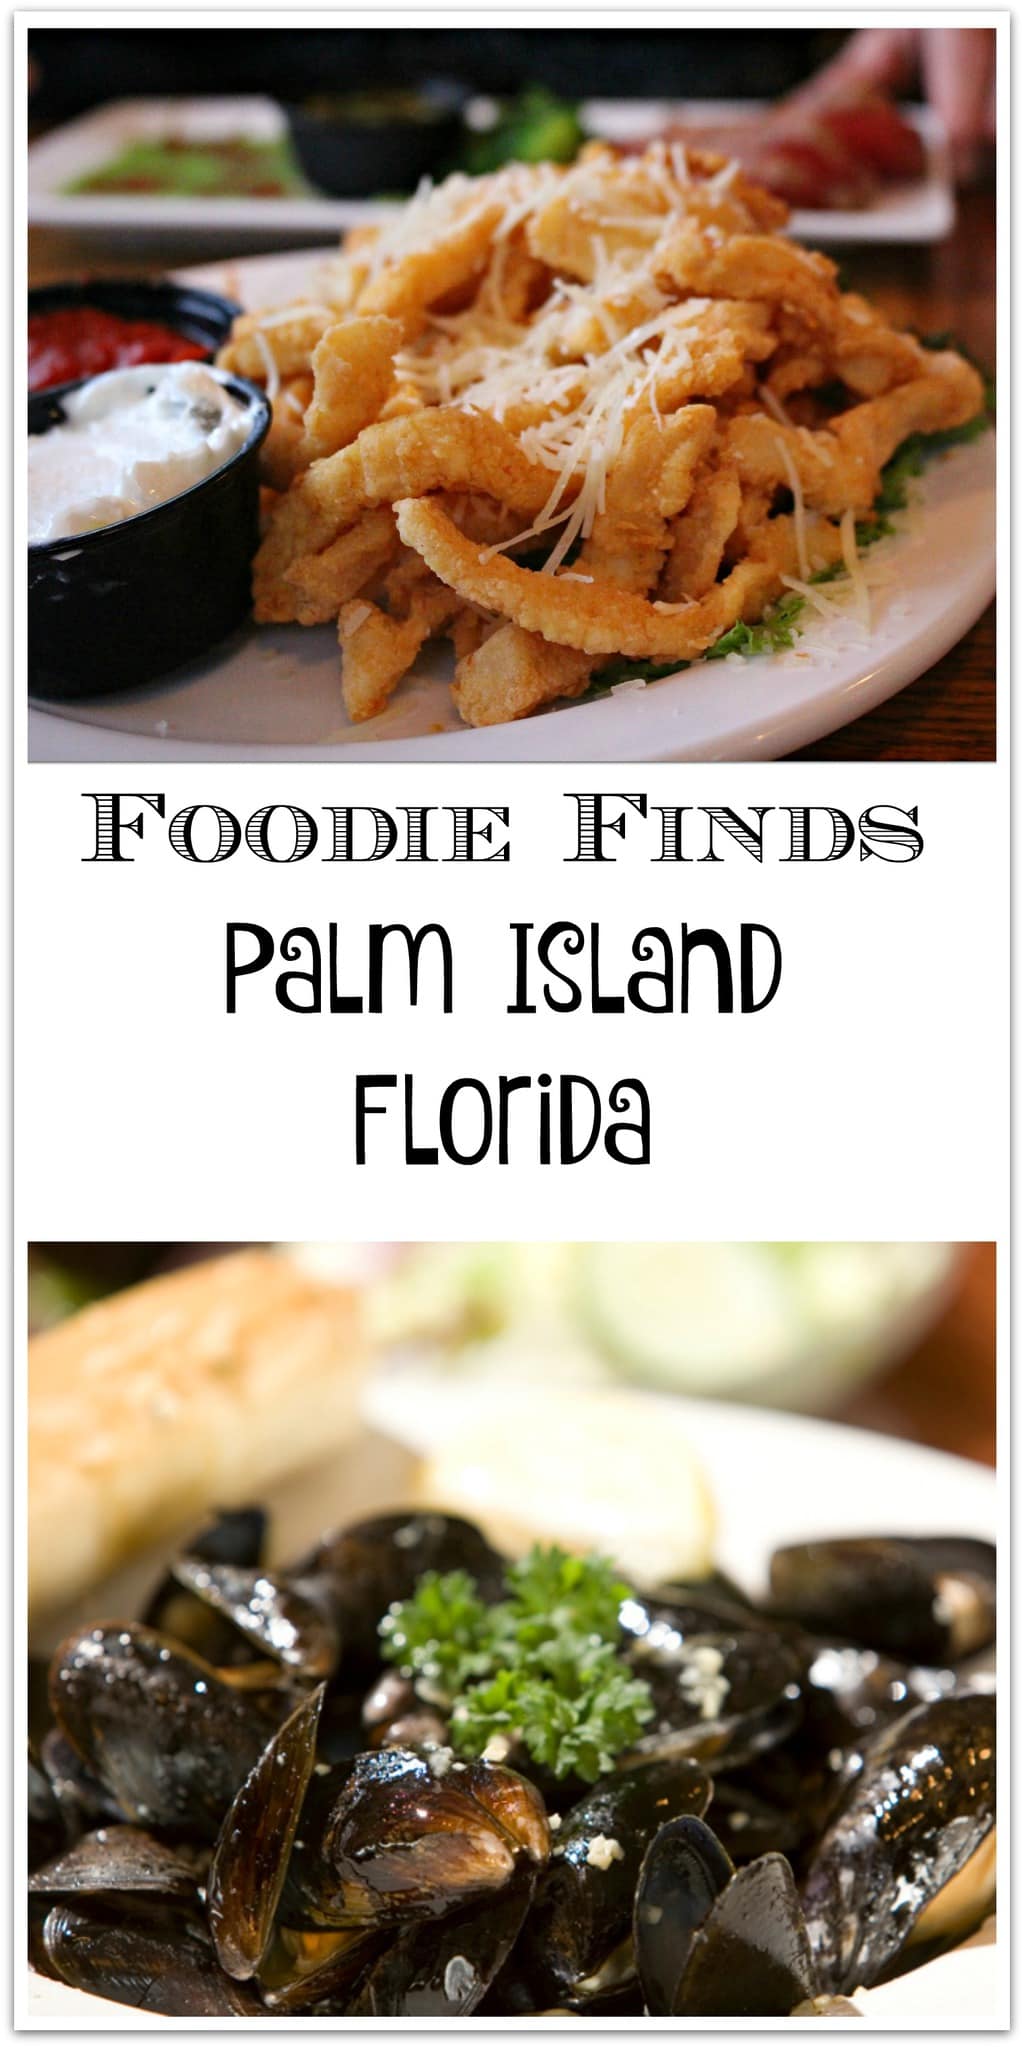 Great foodie finds in Palm Island Florida!